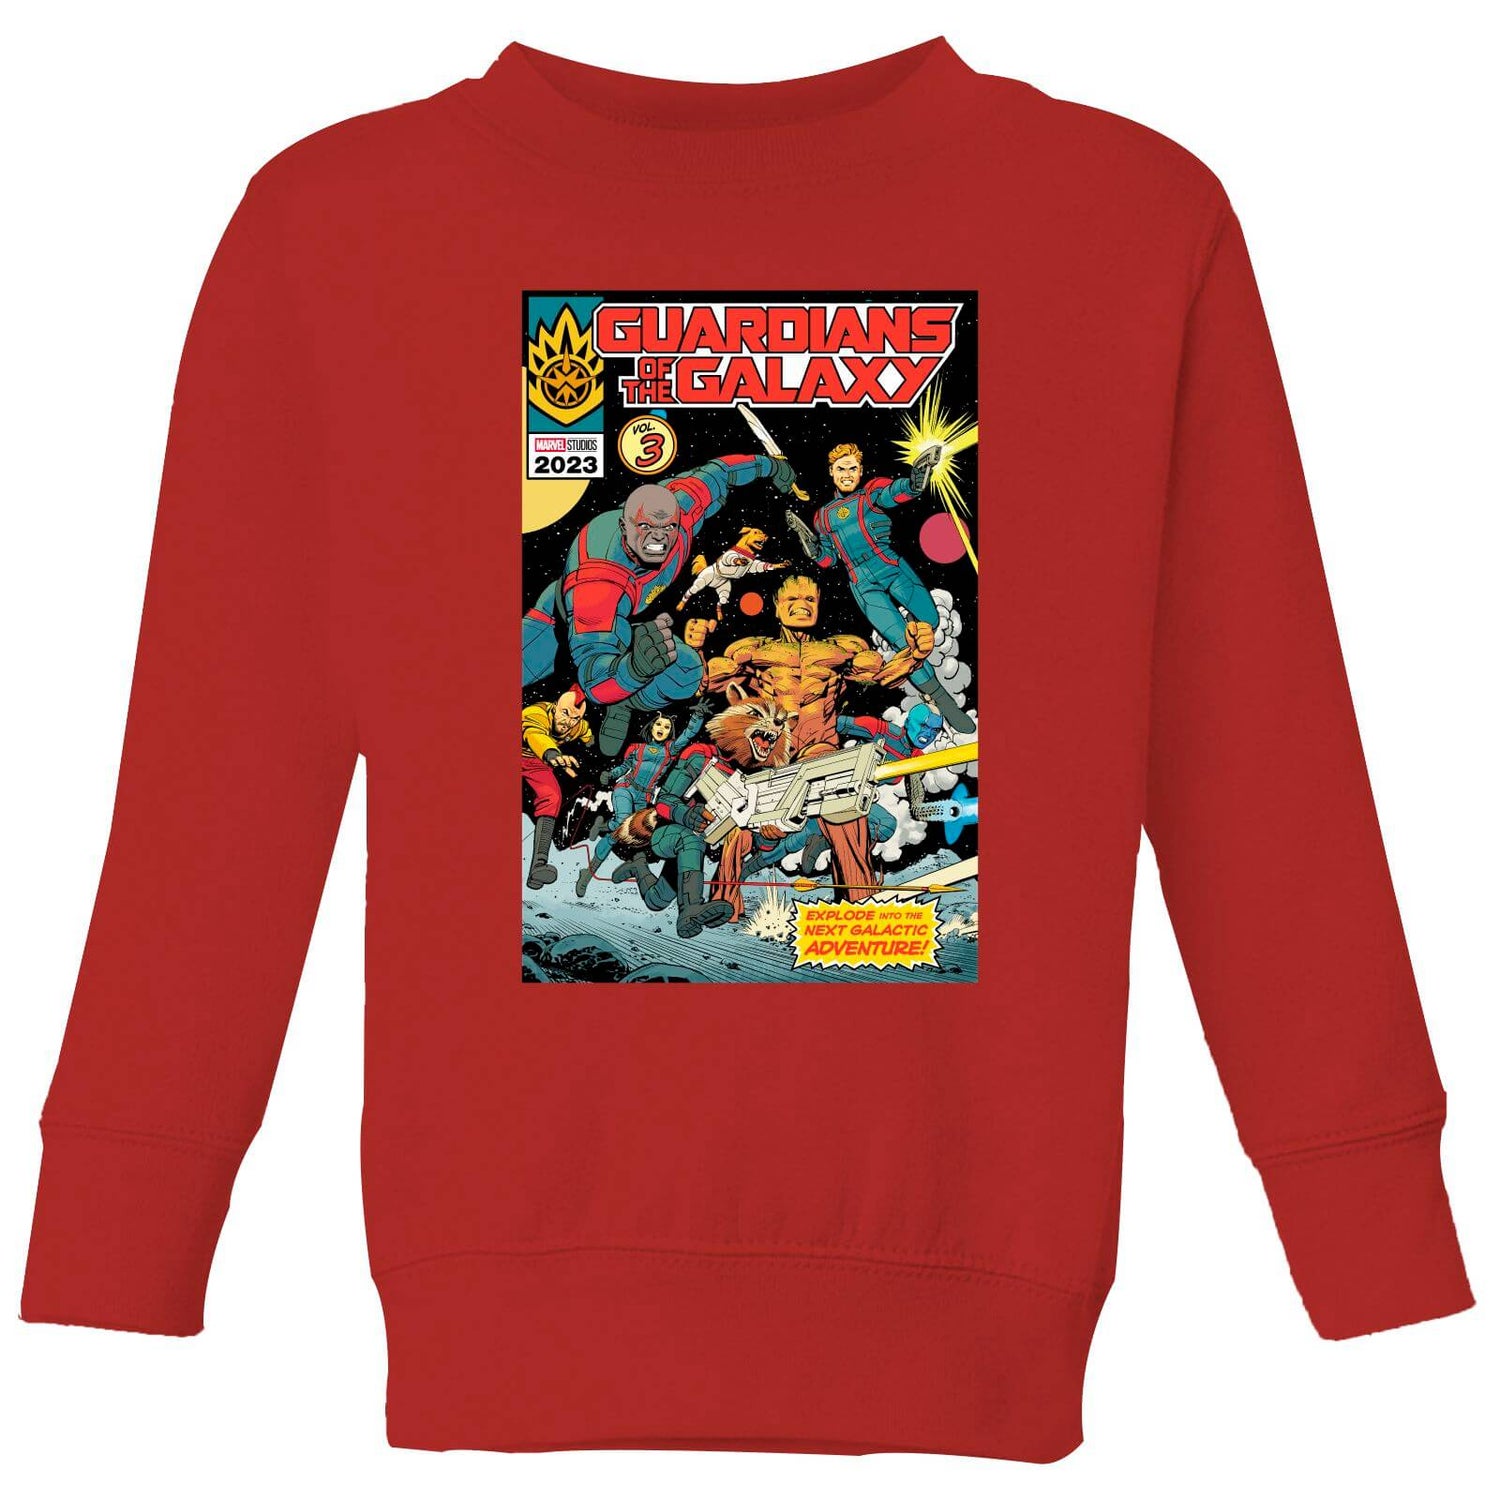 Guardians of the Galaxy The Next Galactic Adventure Kids' Sweatshirt - Red